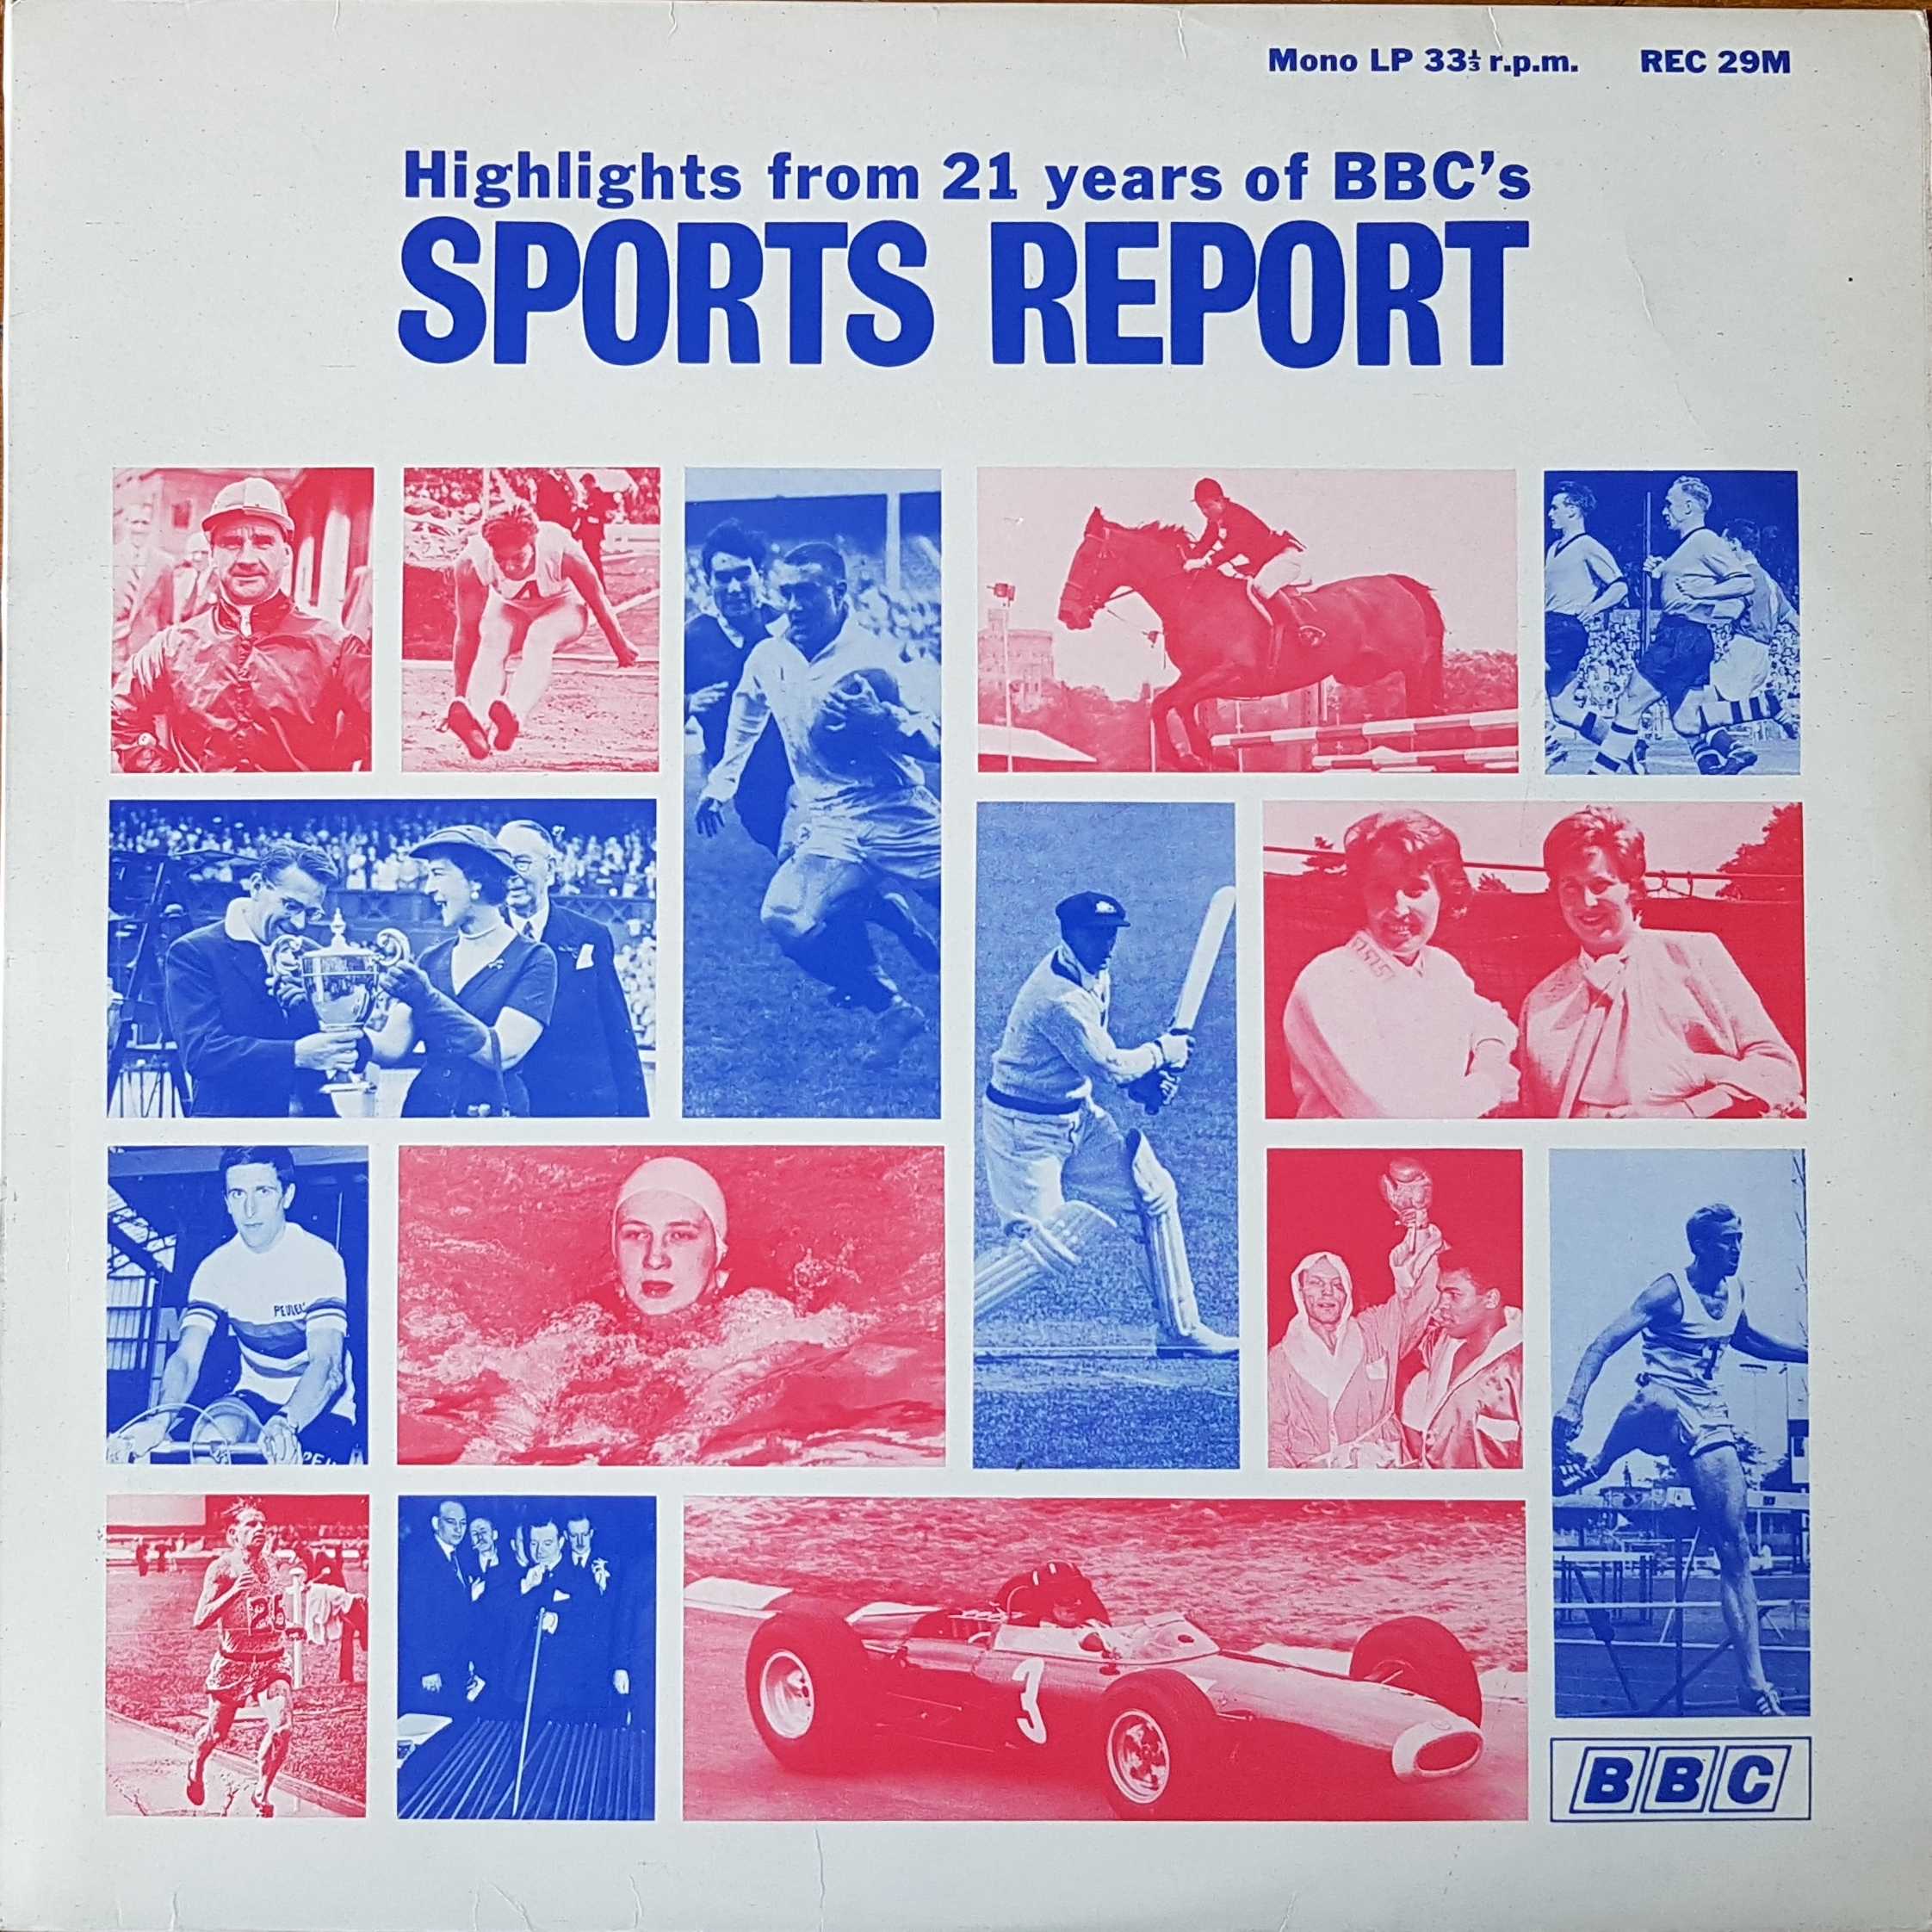 Picture of REC 29 Highlights from 21 years of BBC sports reports by artist Various from the BBC albums - Records and Tapes library